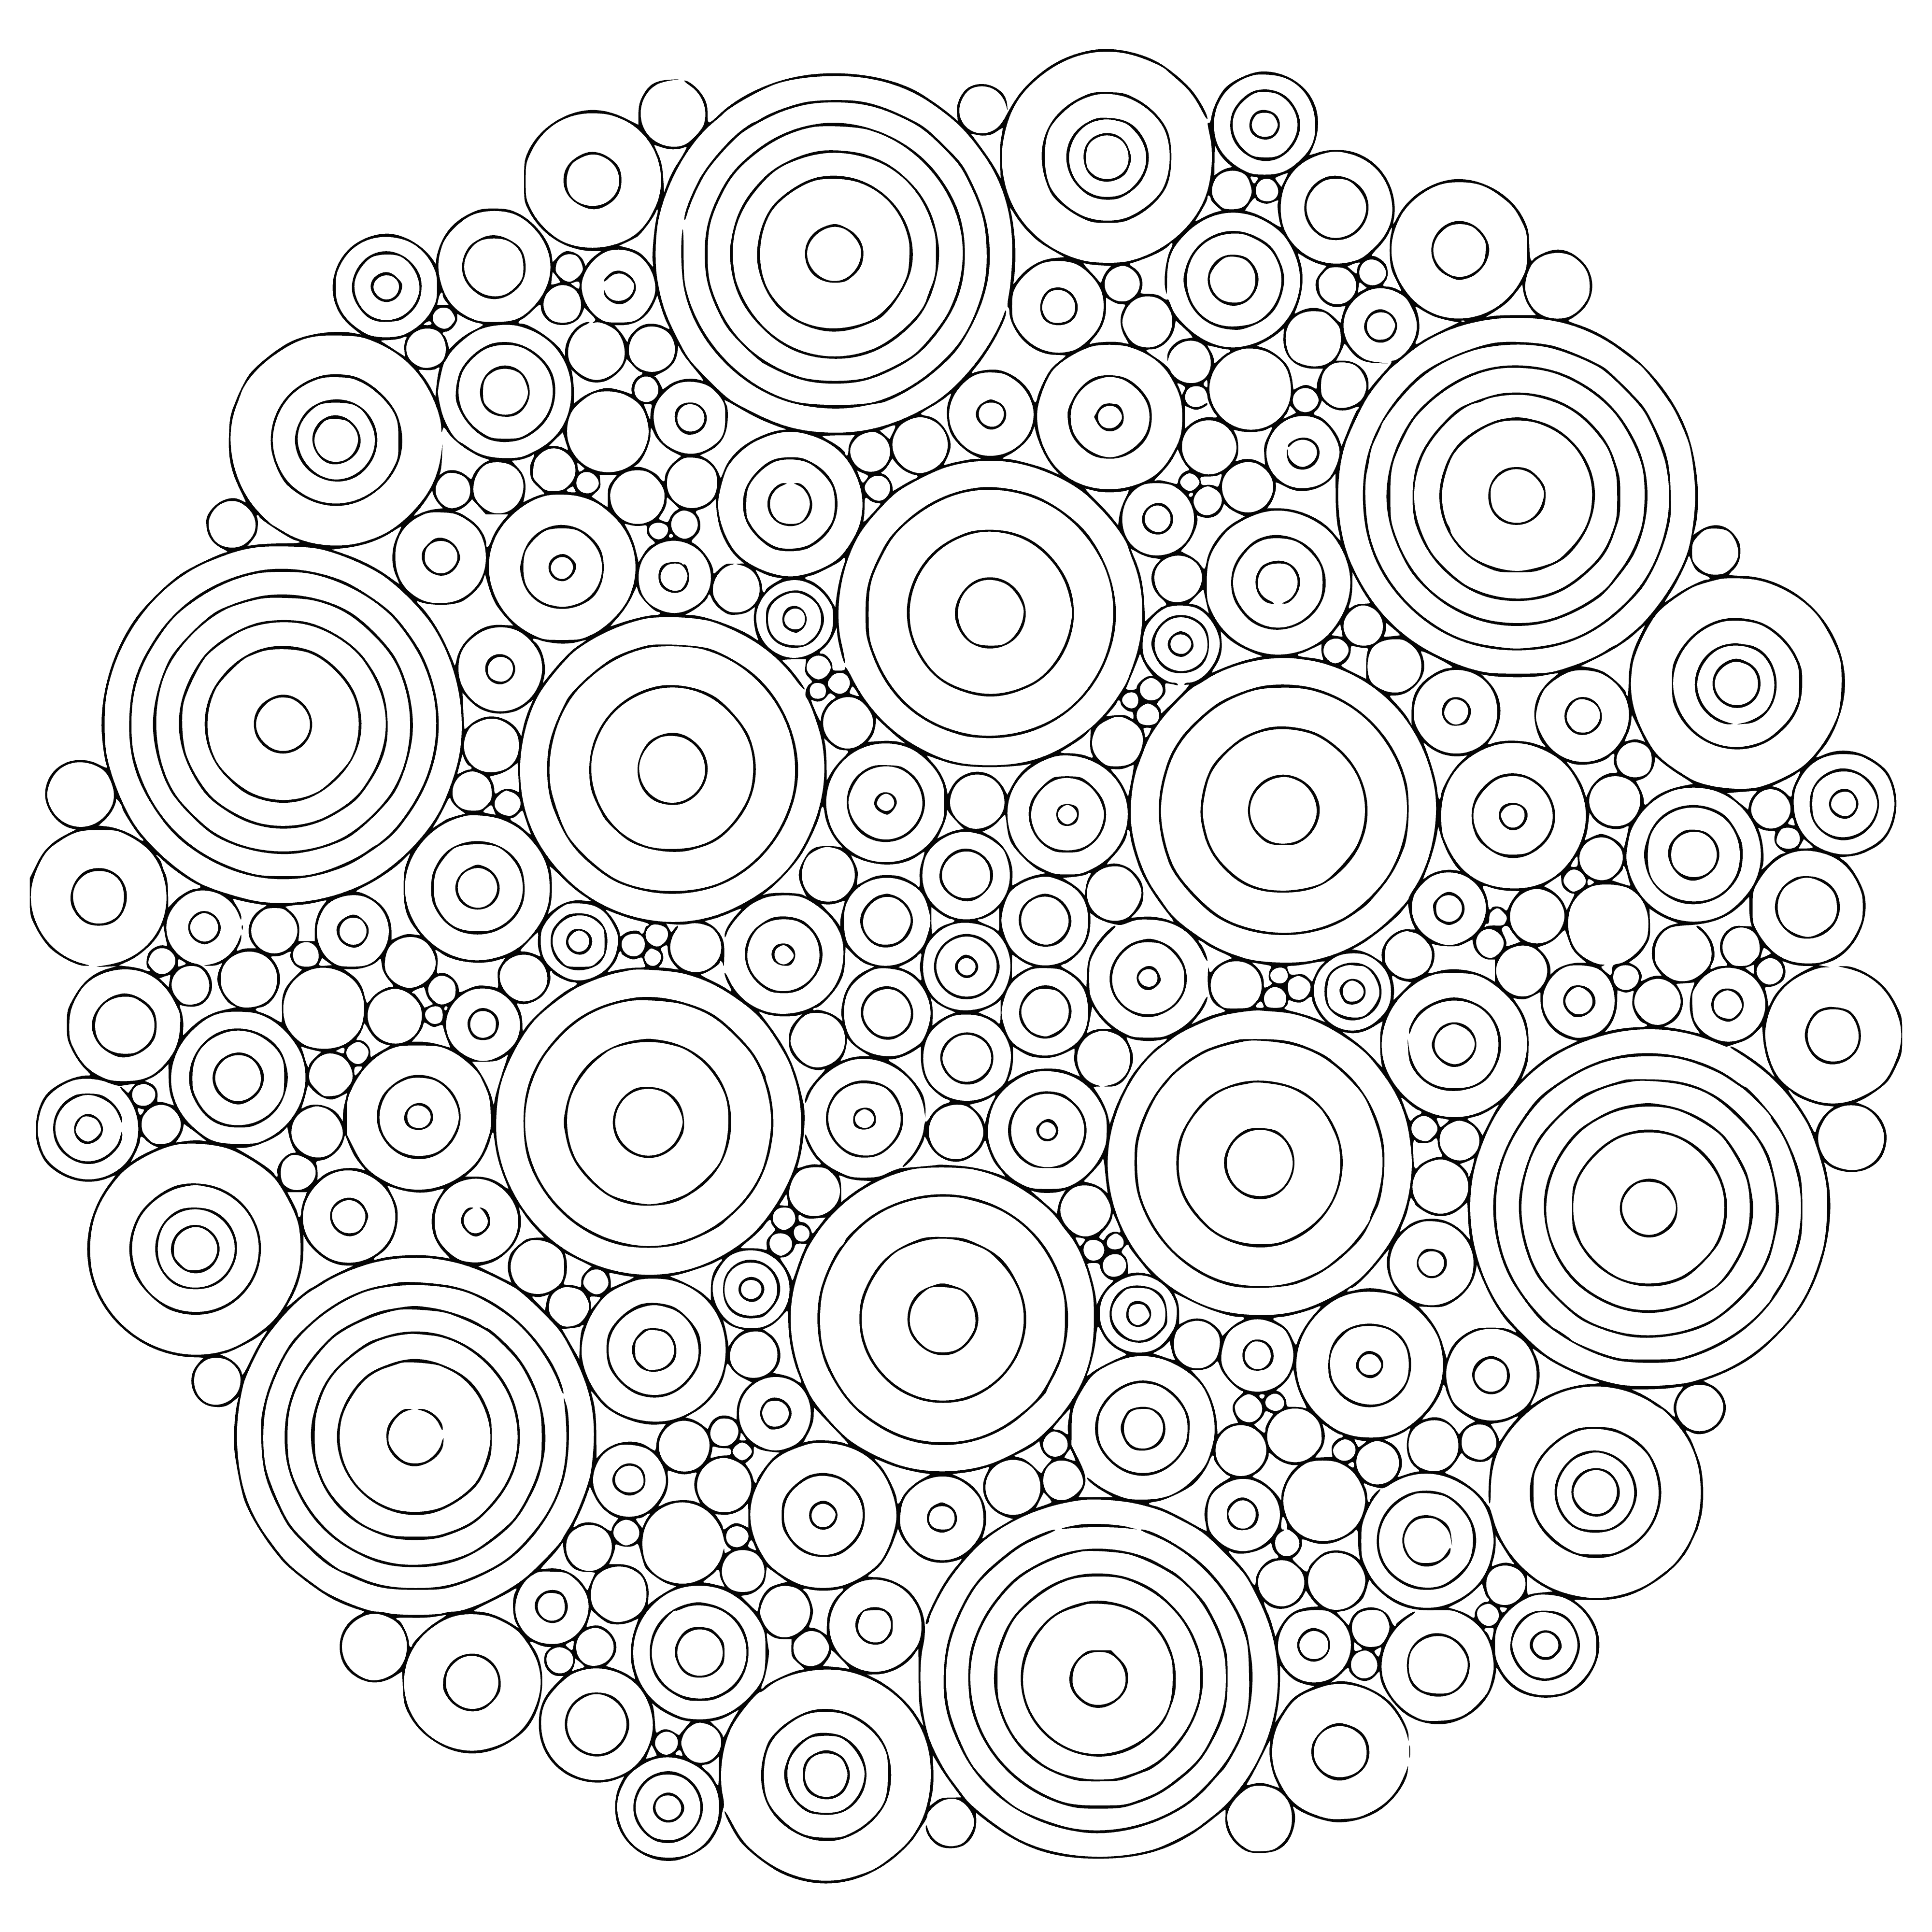 coloring page: Circular mandala filled/unfilled shapes and patterns, some have smaller mandalas inside.